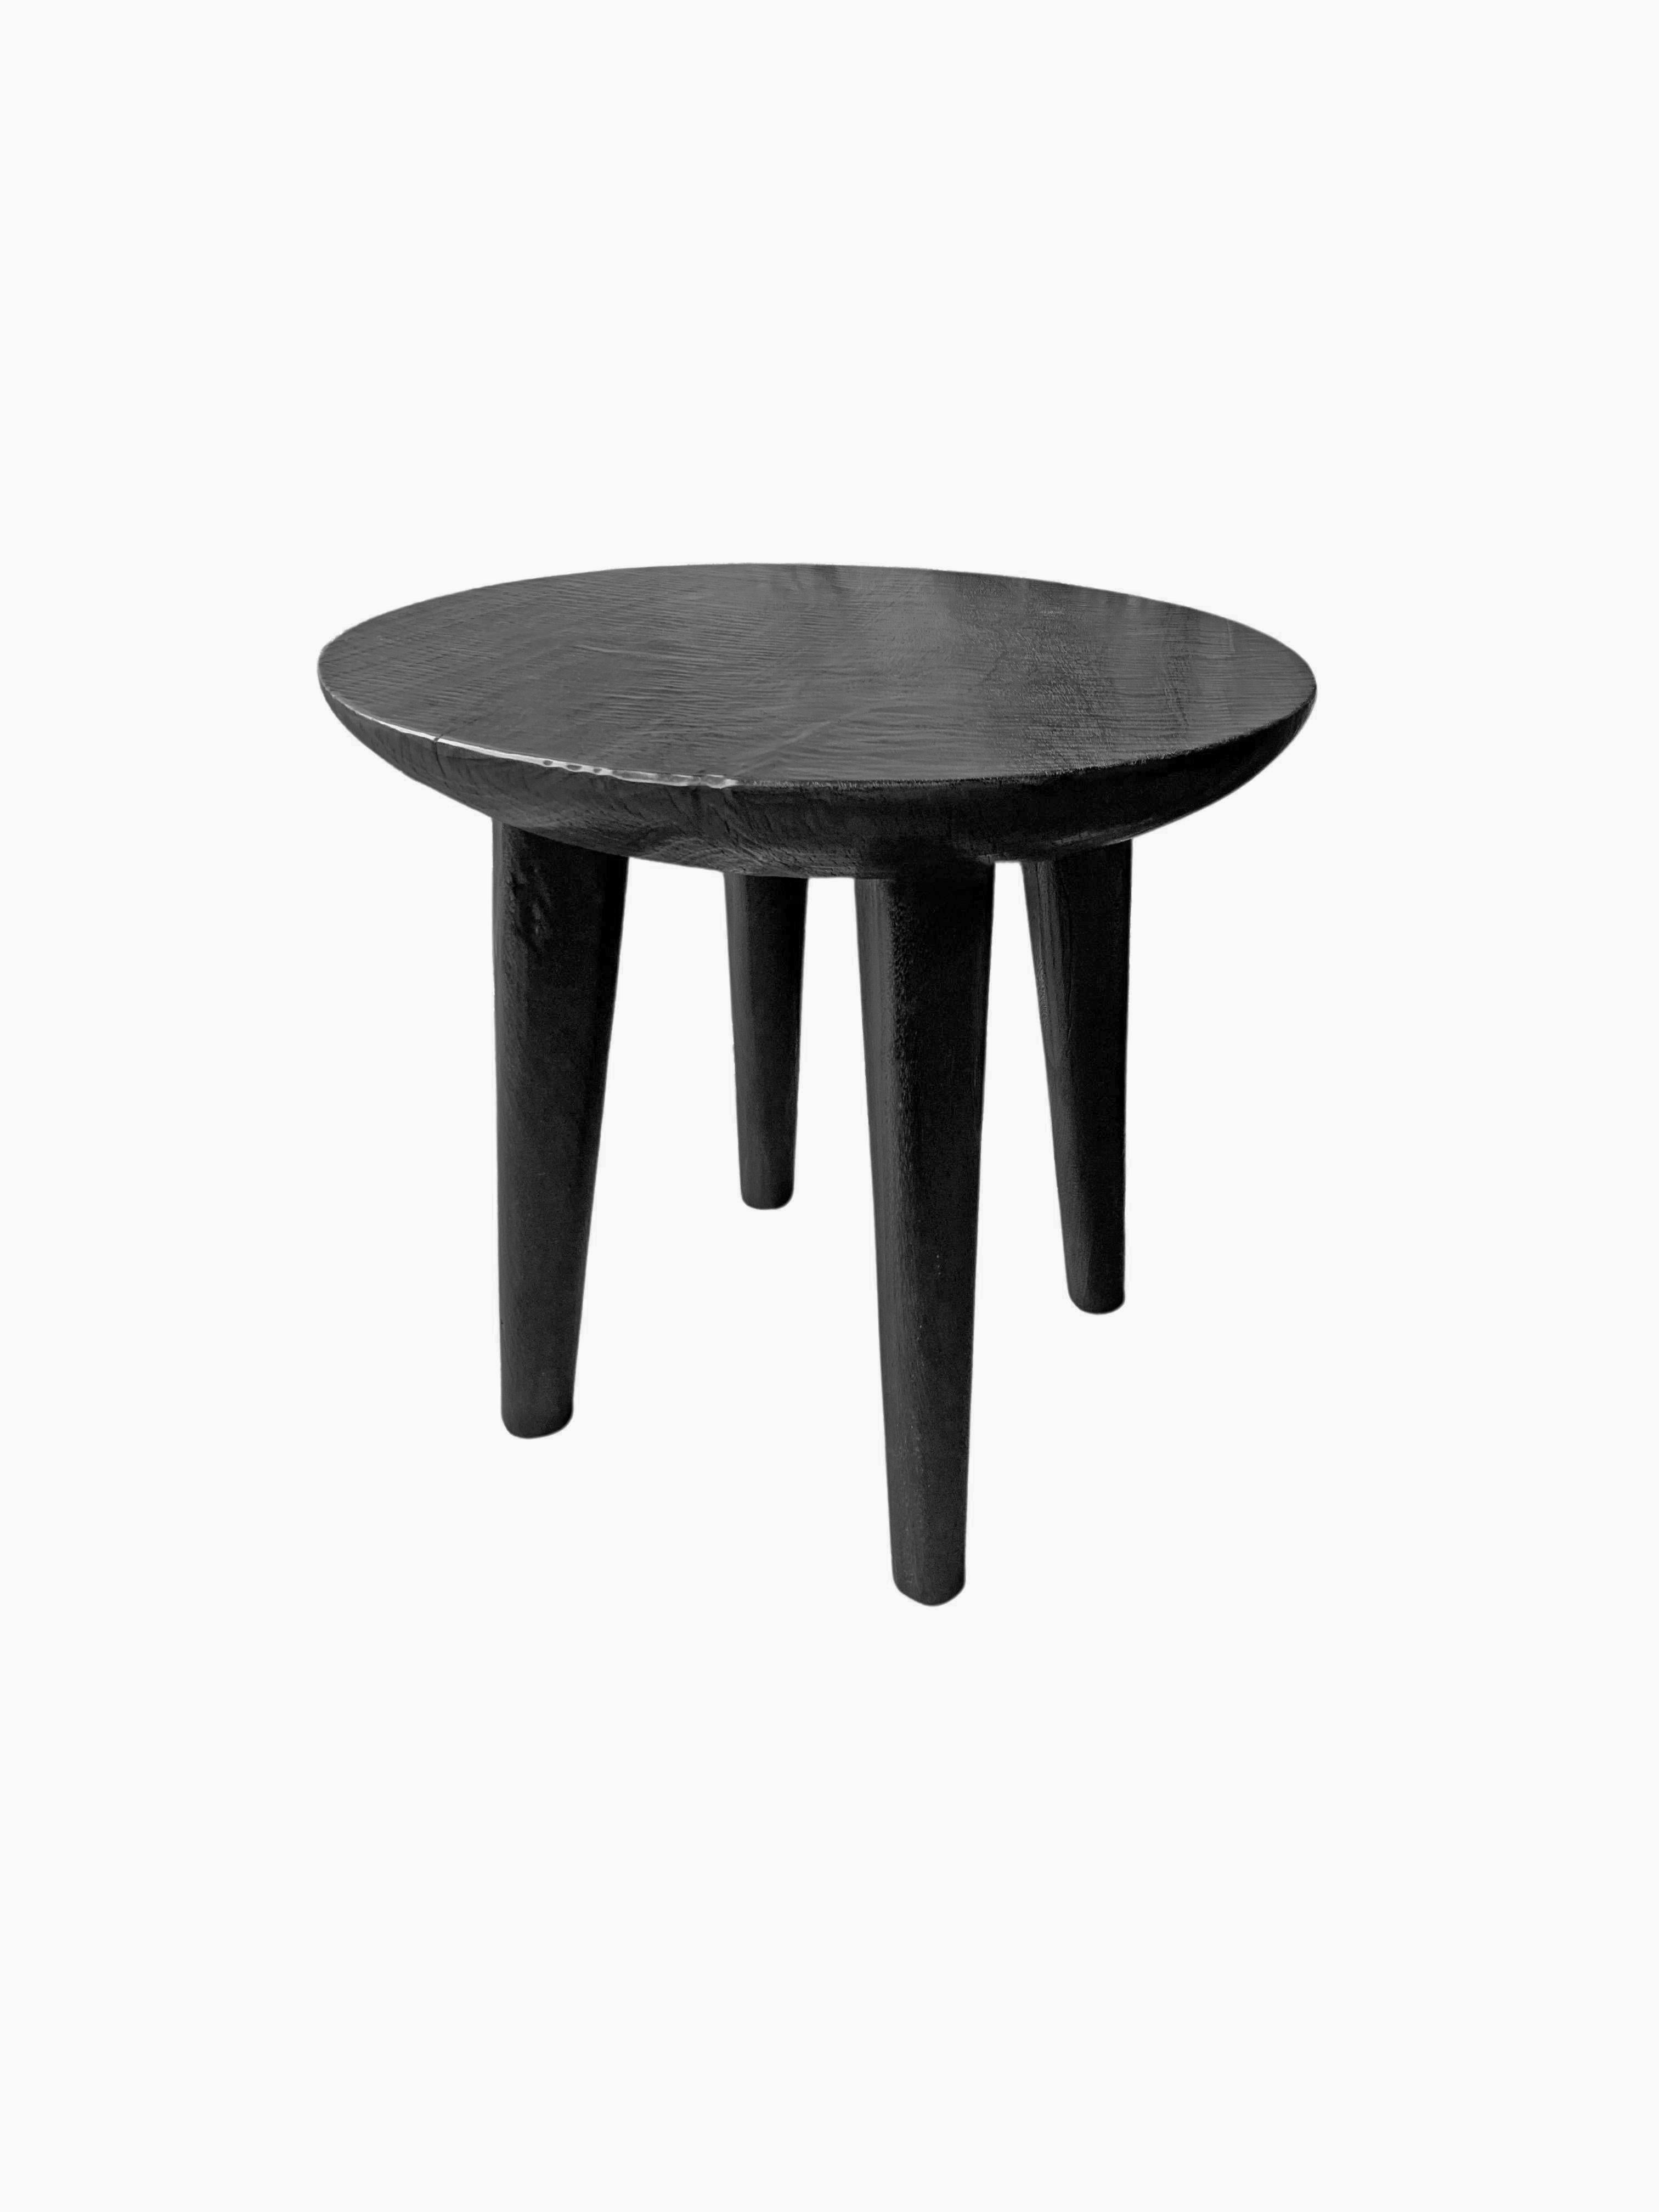 A wonderfully sculptural round side table with narrowly proportioned legs. Its stark black pigment was achieved through burning the wood three times. Its neutral pigment and subtle wood texture makes it perfect for any space. A uniquely sculptural